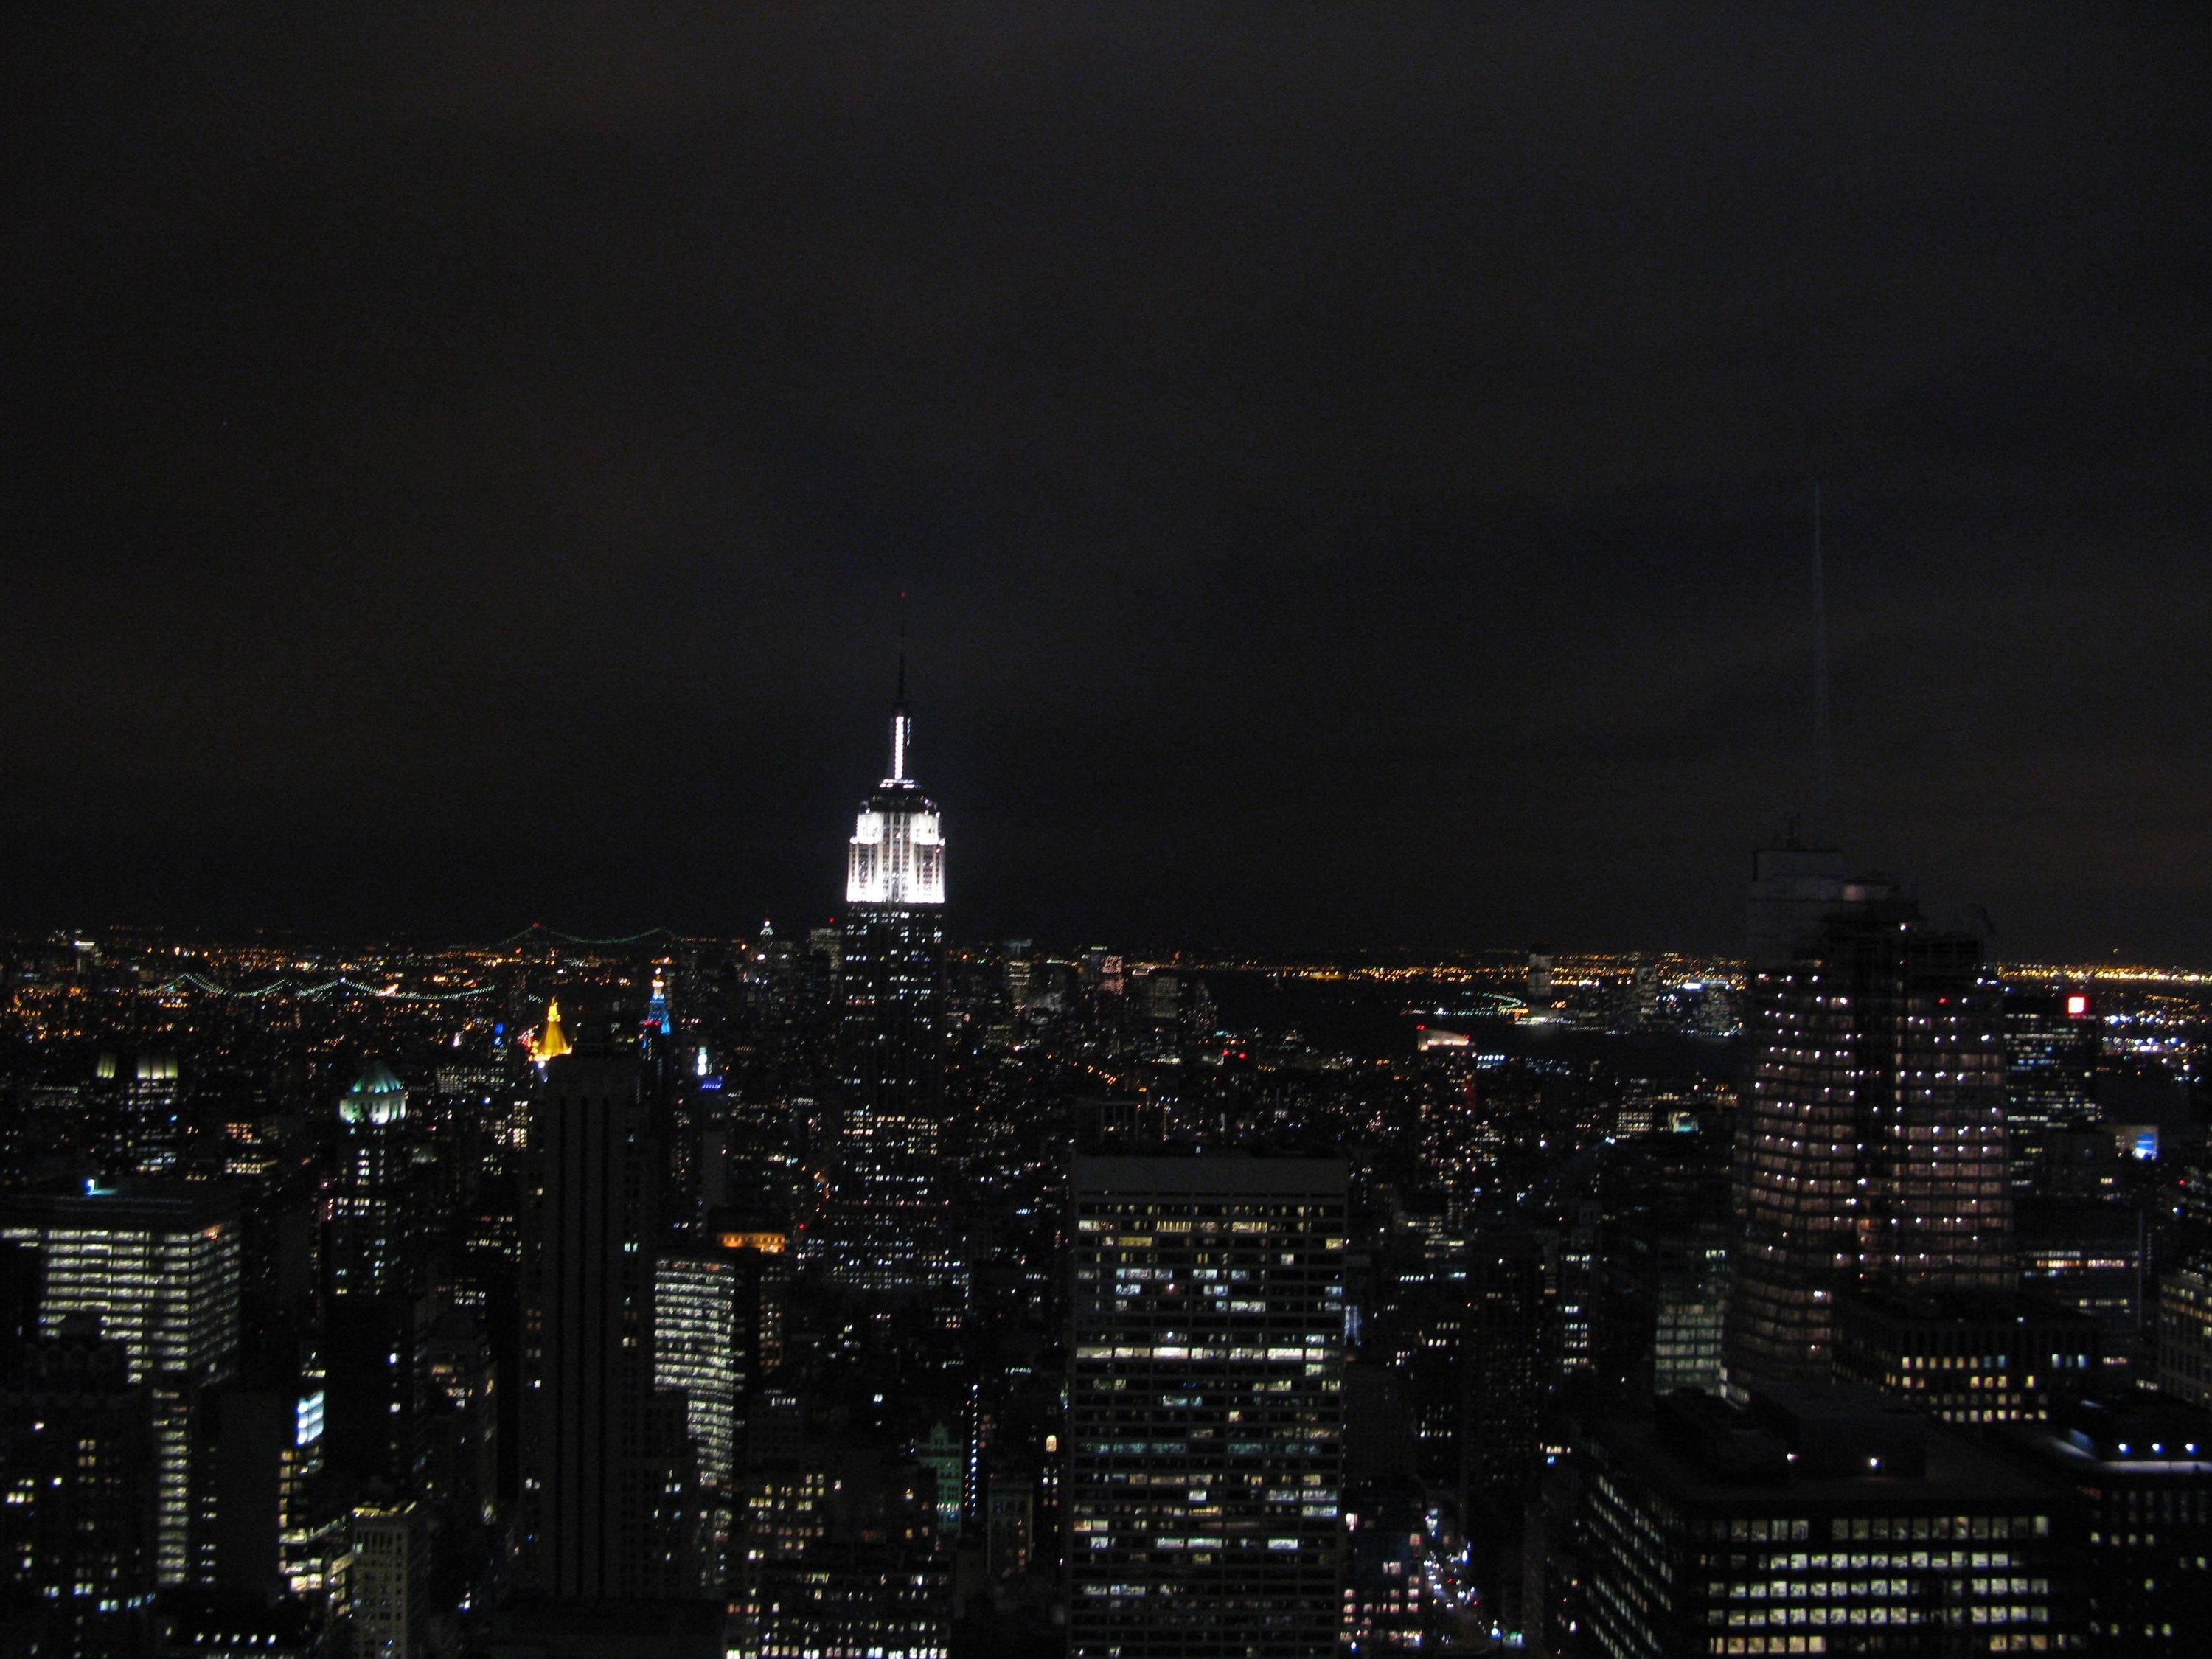 From the Top of the Rock